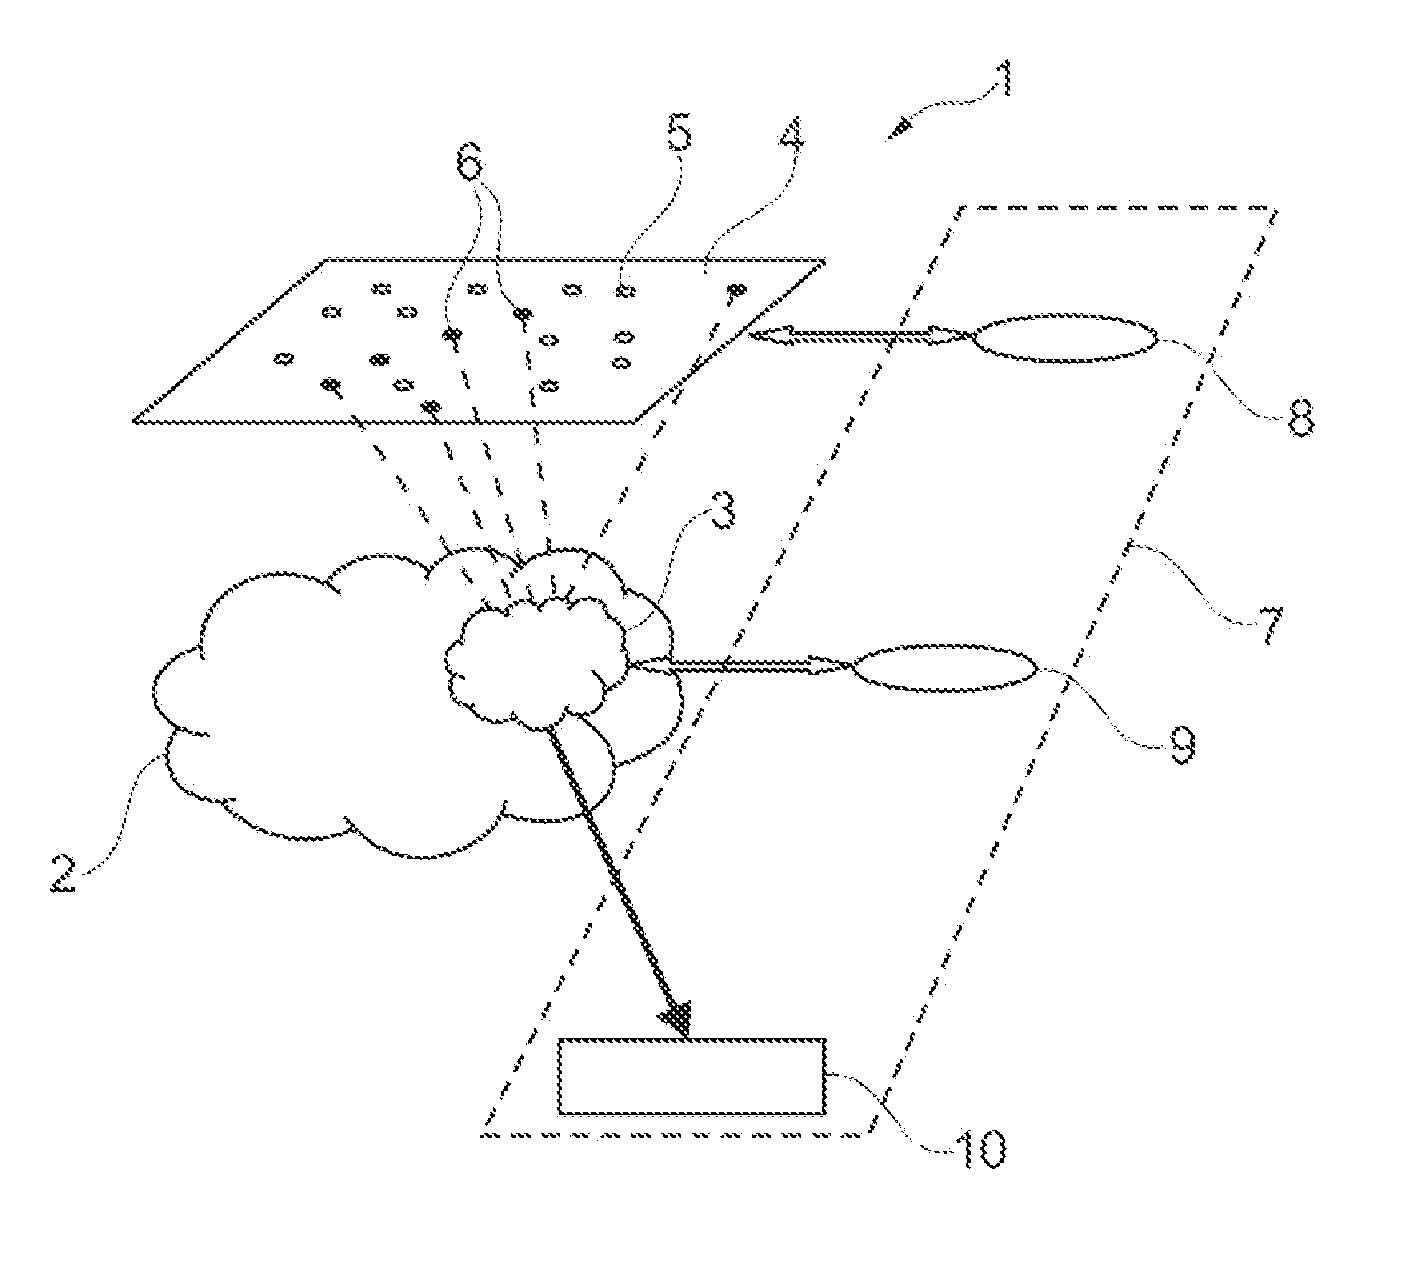 Systems and methods for collecting information over a peer to peer network